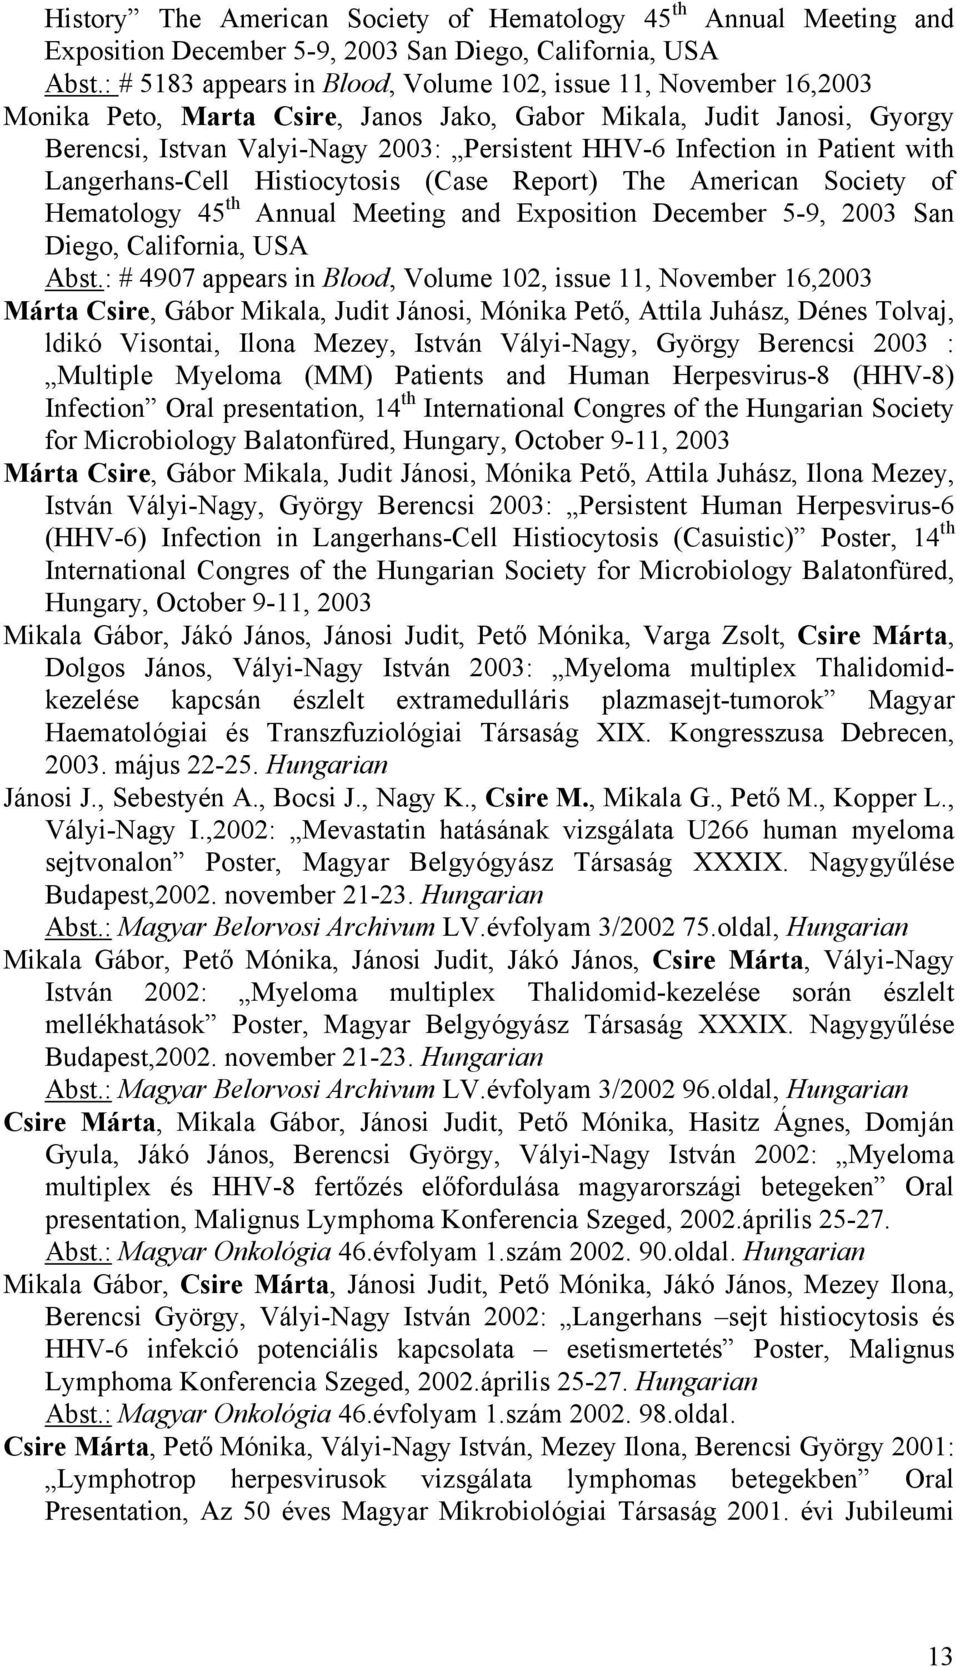 in Patient with Langerhans-Cell Histiocytosis (Case Report) The American Society of Hematology 45 th Annual Meeting and Exposition December 5-9, 2003 San Diego, California, USA Abst.